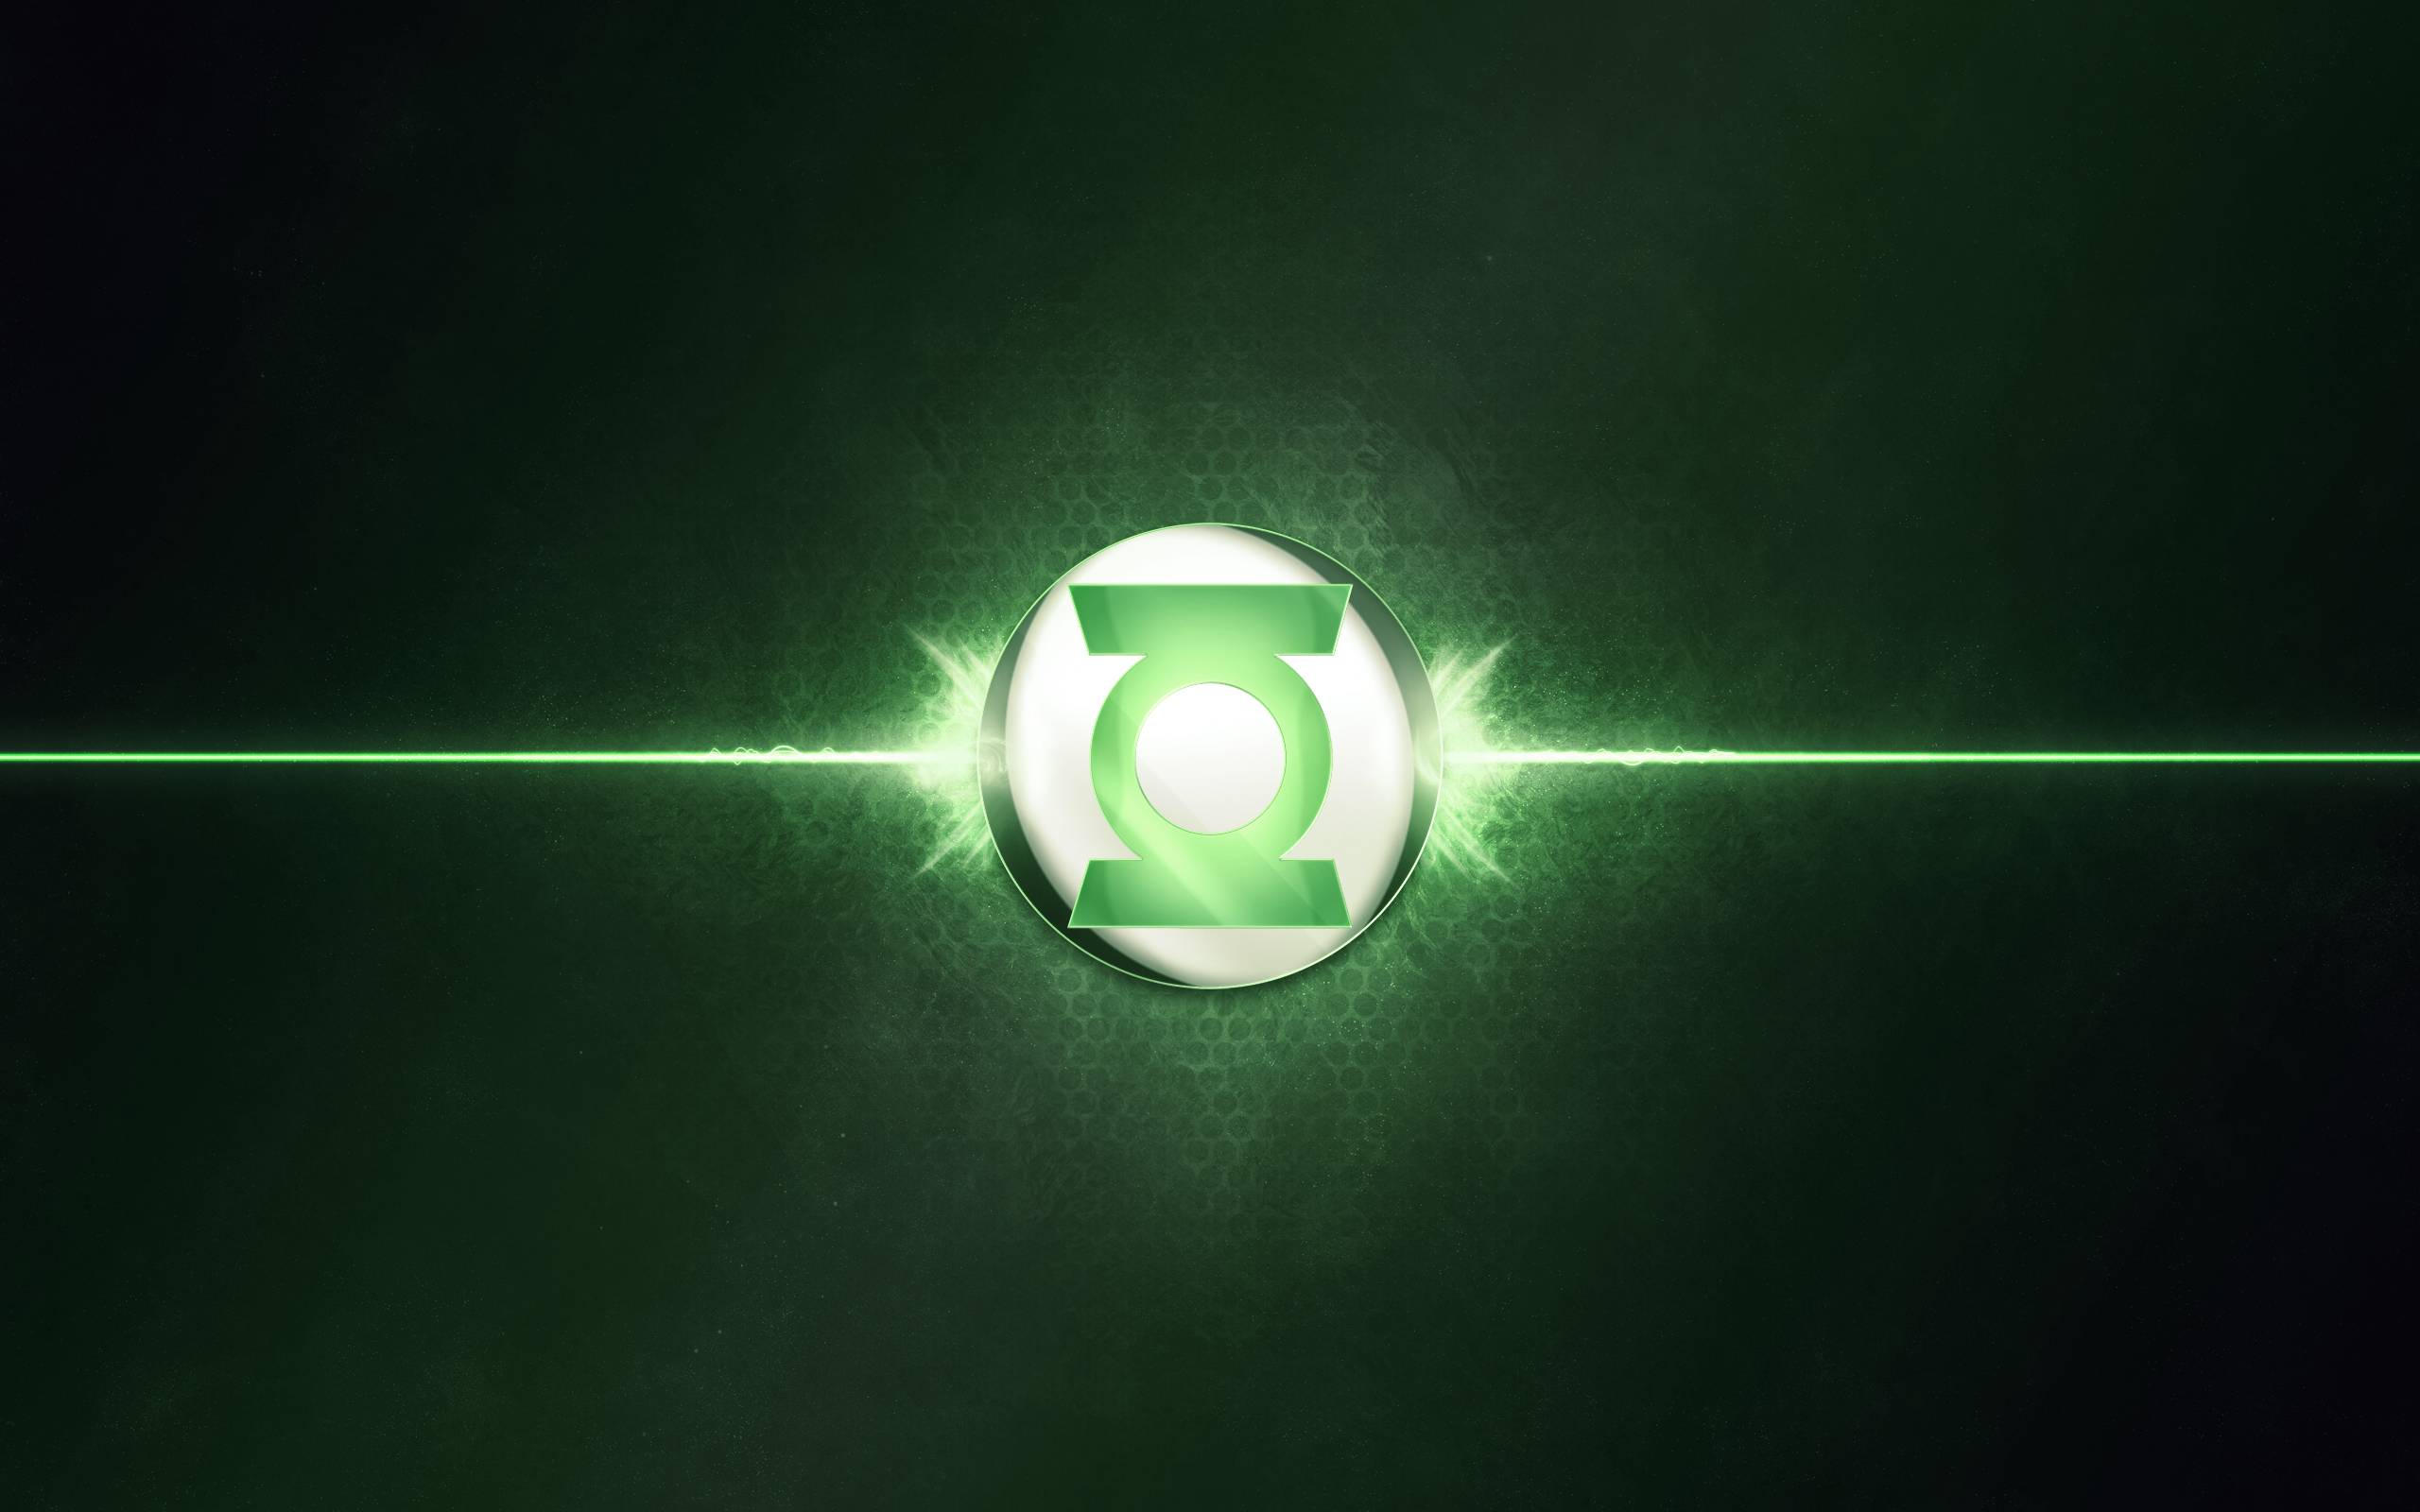 Download Awesome Green Lantern Wallpapers 23541 2560x1600 px High